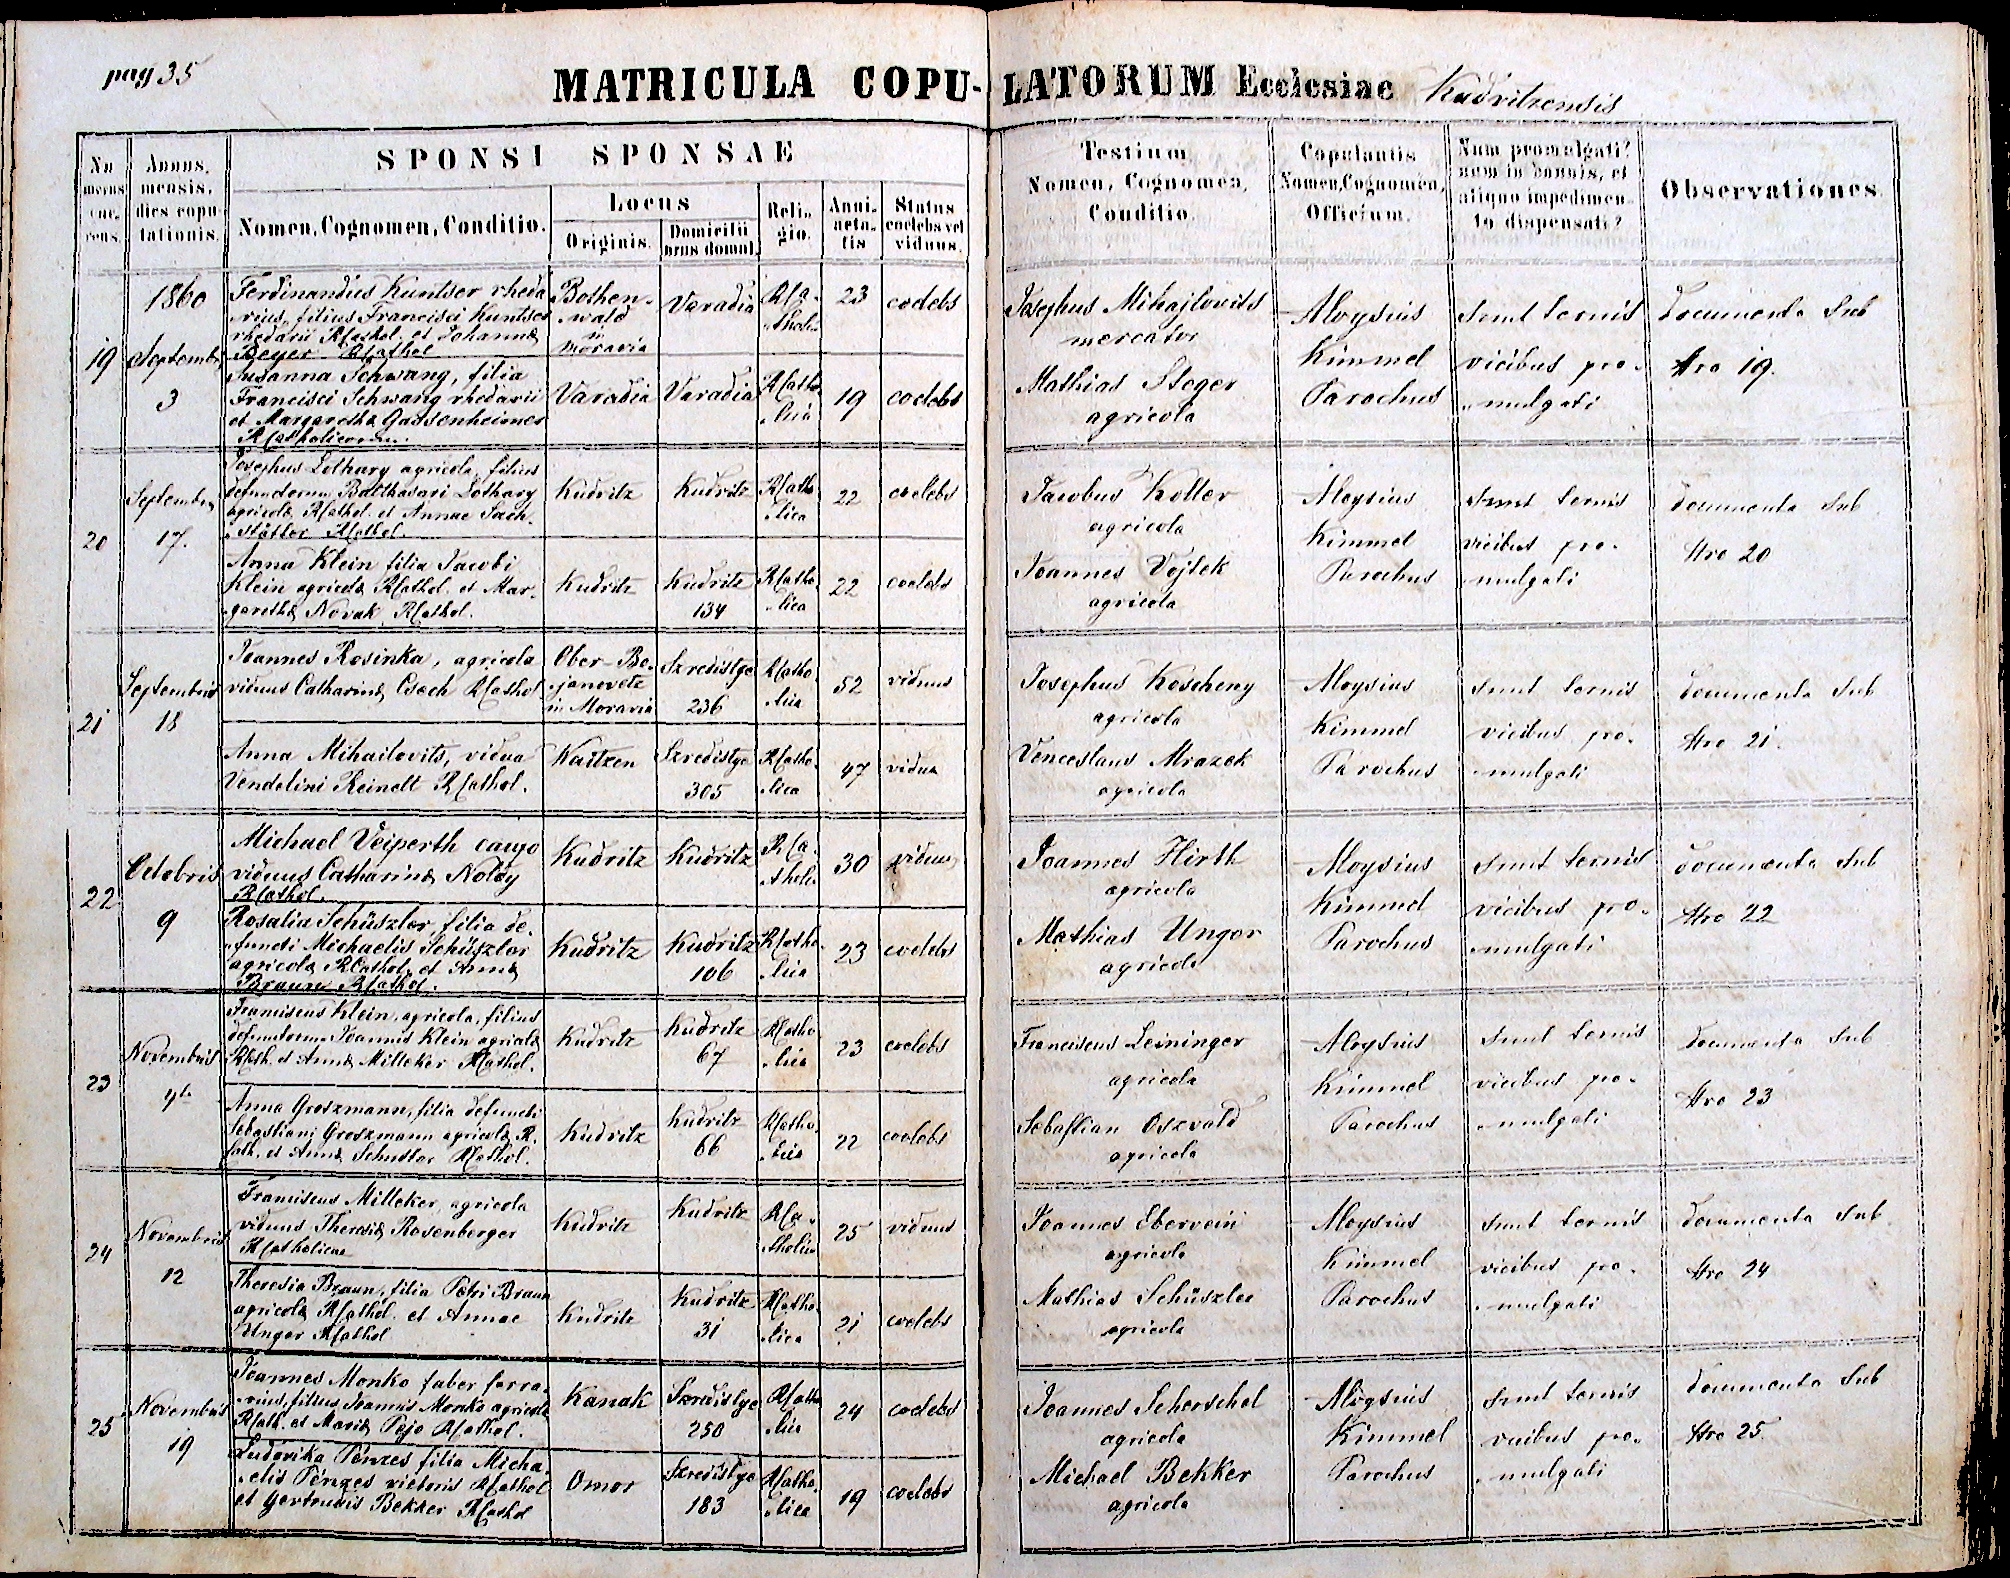 images/church_records/MARRIAGES/1871-1890M/035